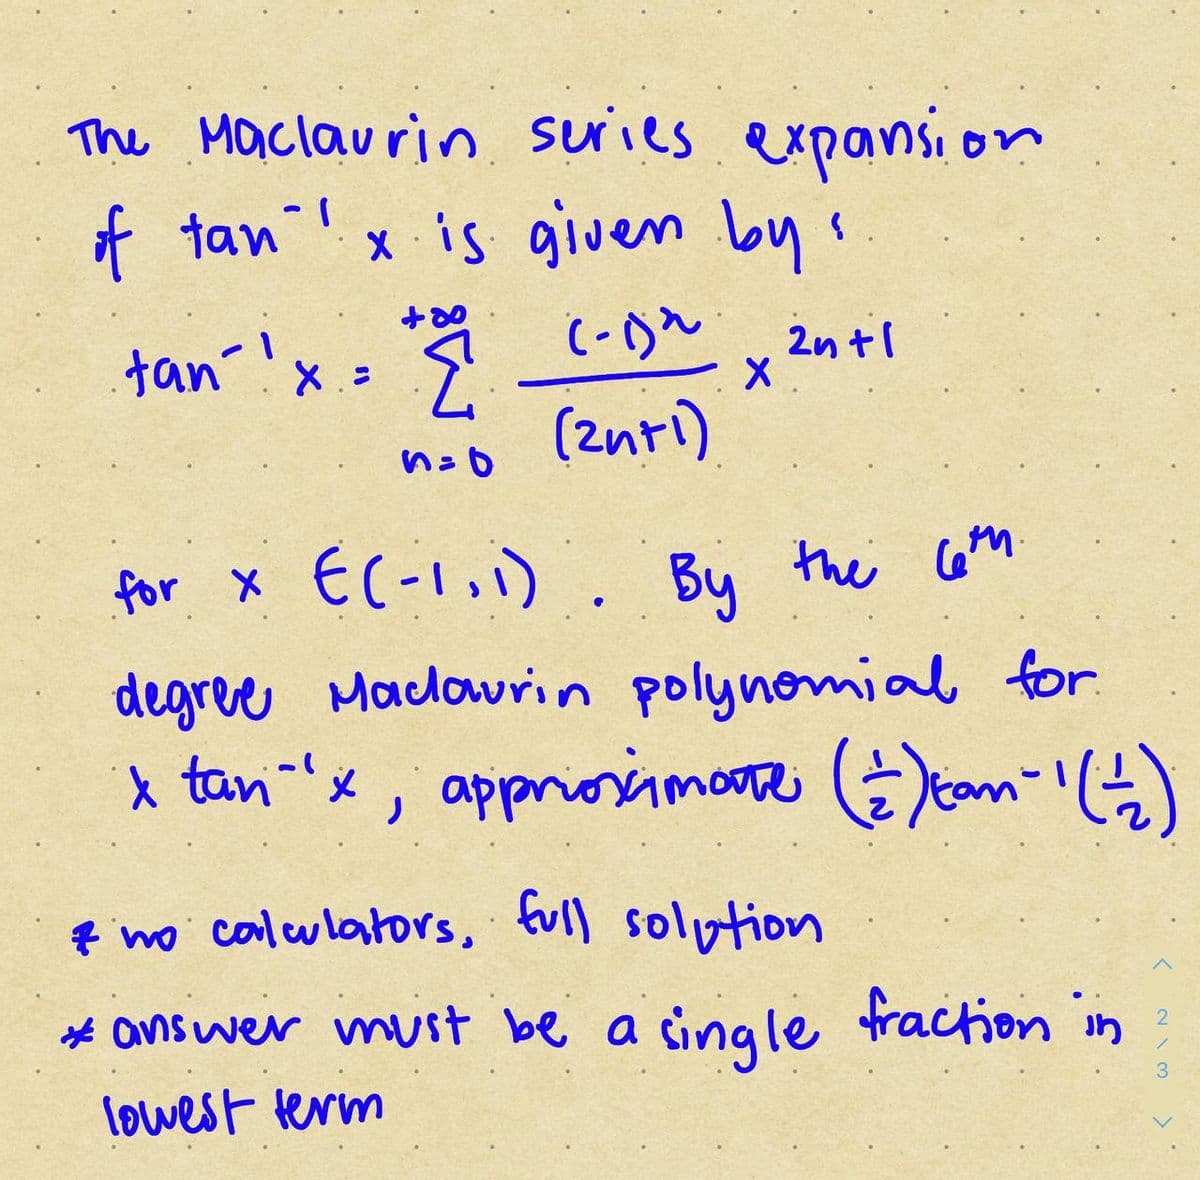 The Maclaurin suries expansi on
of tan !x is given bys
2nt1
tan''x
(znri)
for X EC-1,i). Bu the Co
degree Maclowrin polynomial for
X tan-'x, appriosimore E)cam-'G)
f mo calulators, tull solption
* answer must be a single fraction in
2
3
lowest term
